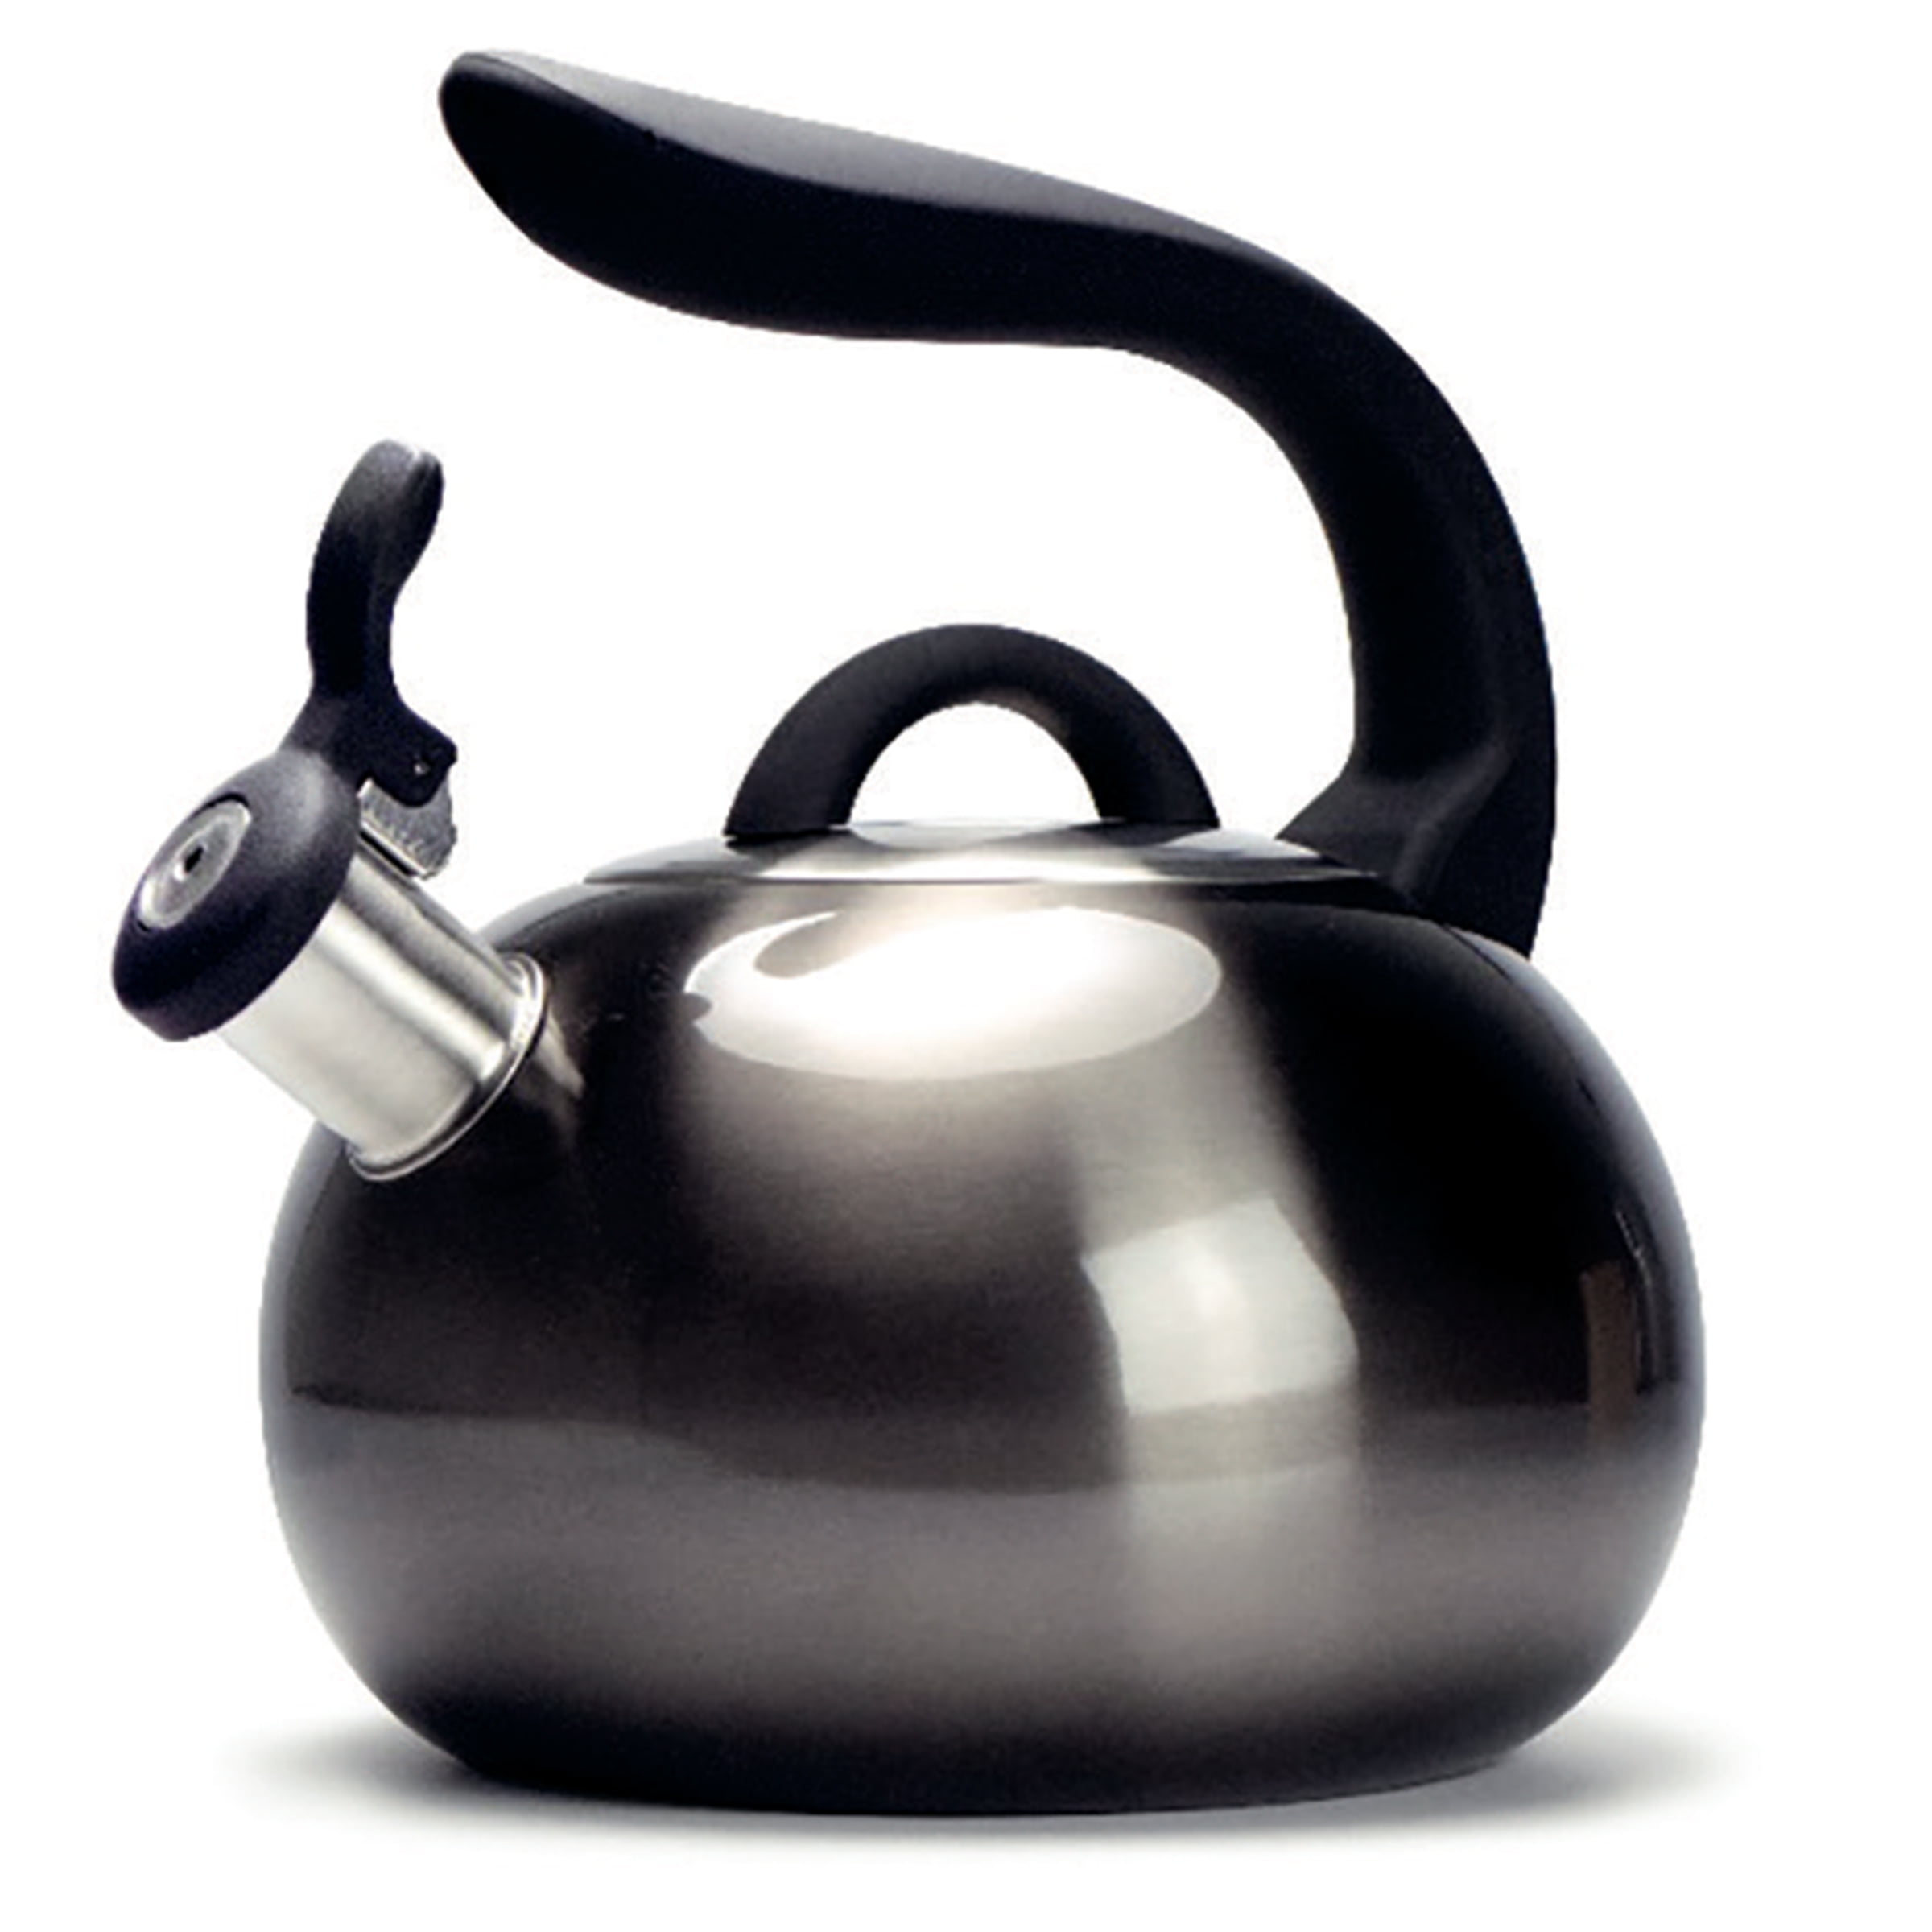 Rorence Stainless Steel Whistling kettle: 2.5 Quart with Capsule Bottom &  Heat-resistant Glass Lid - Blue/Red